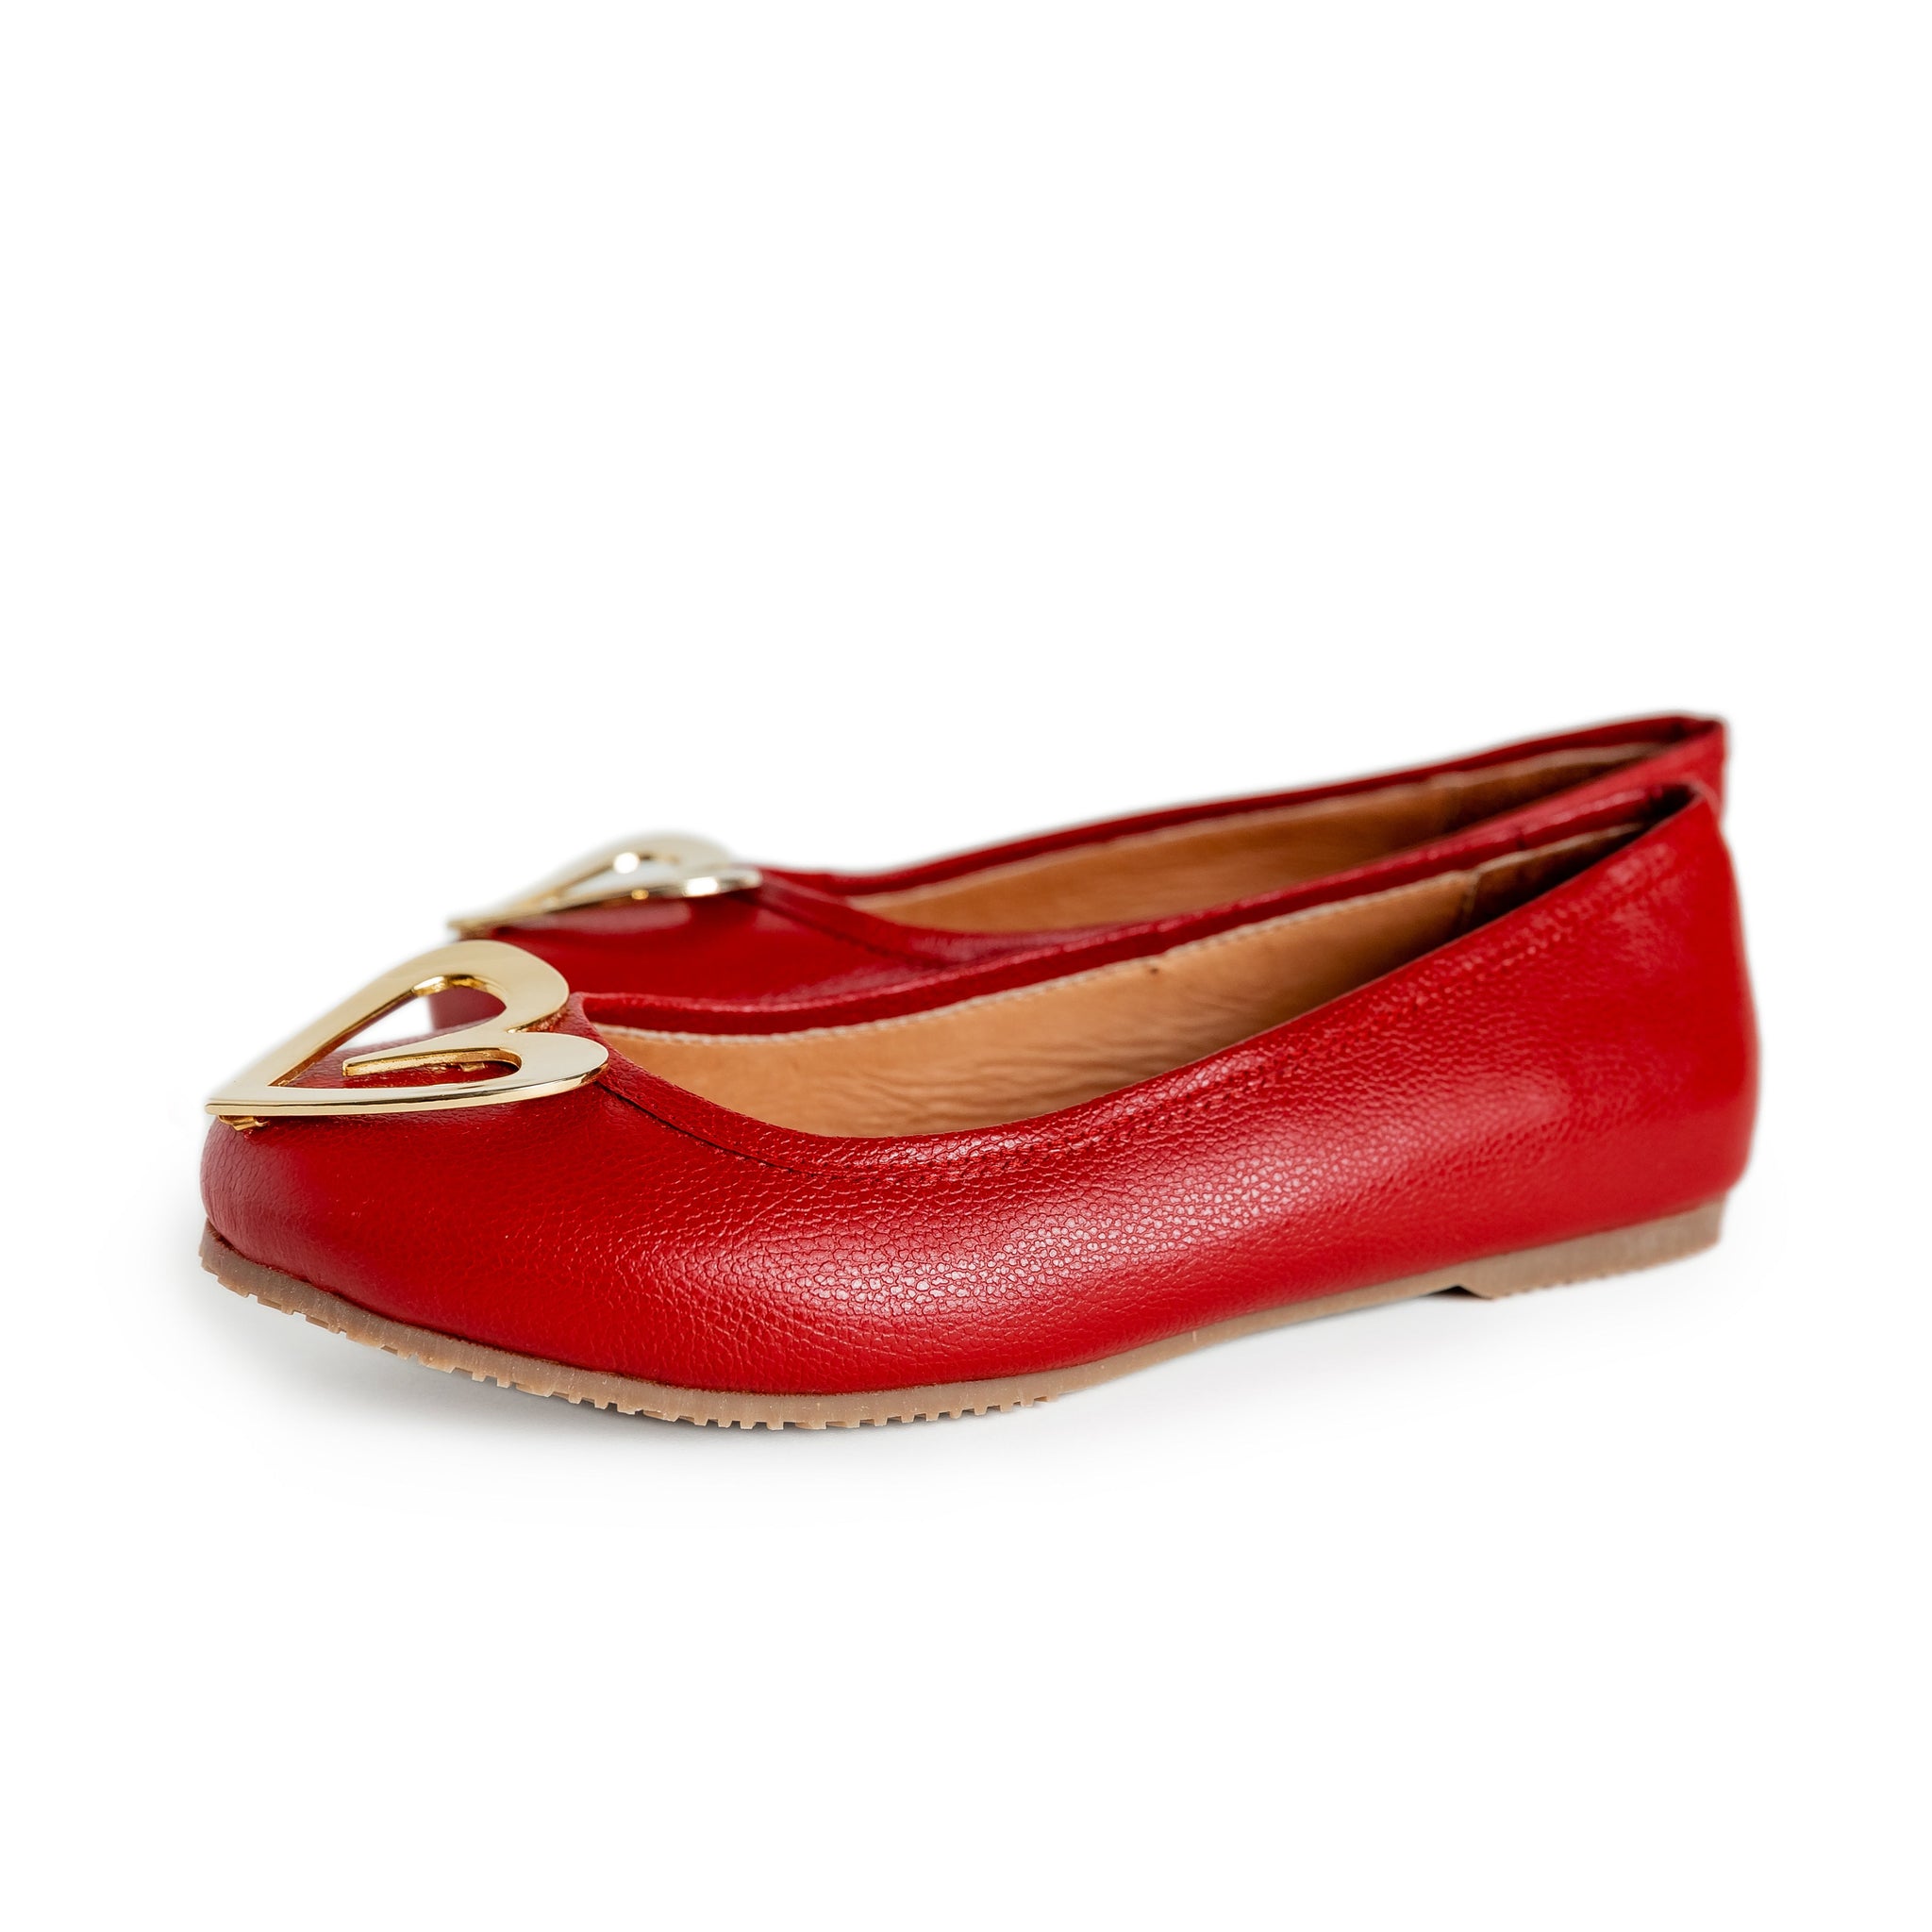 Ballerinas Pipa Red by Nataly Mendez. Leather upper material Insole lining made of leather Heel height .5 cm